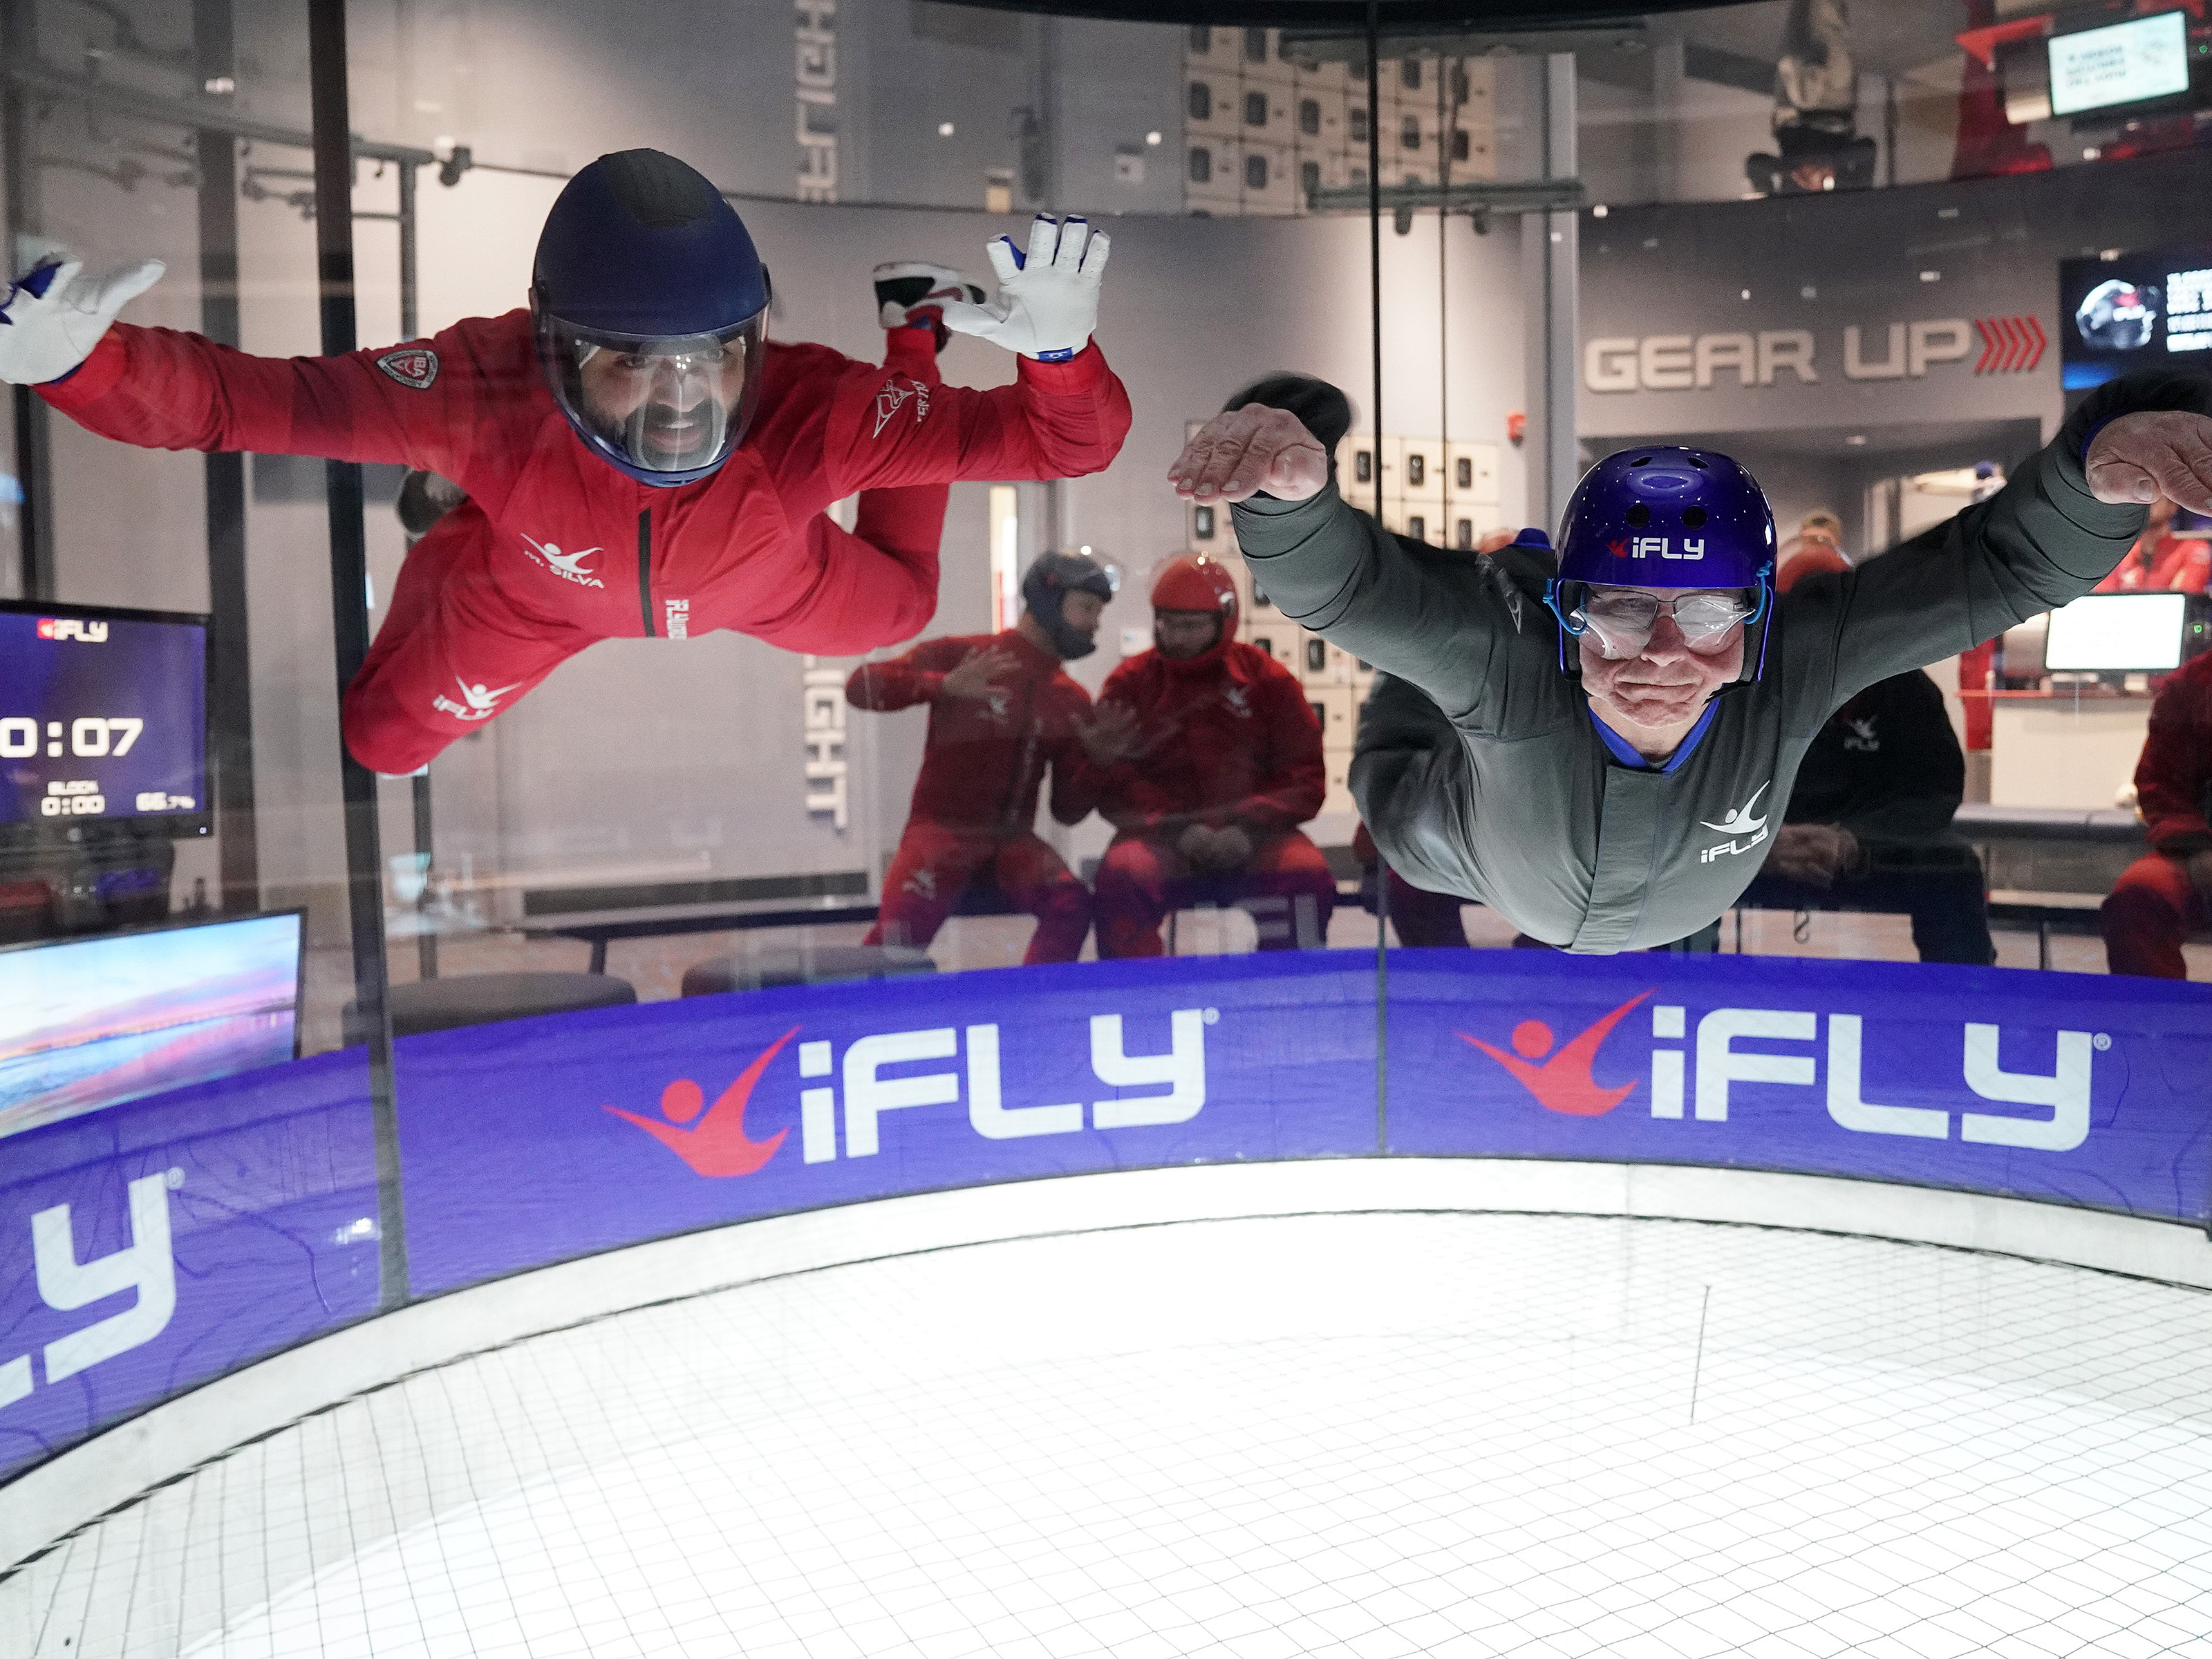 Virtual skydiving at iFly in Star Tribune